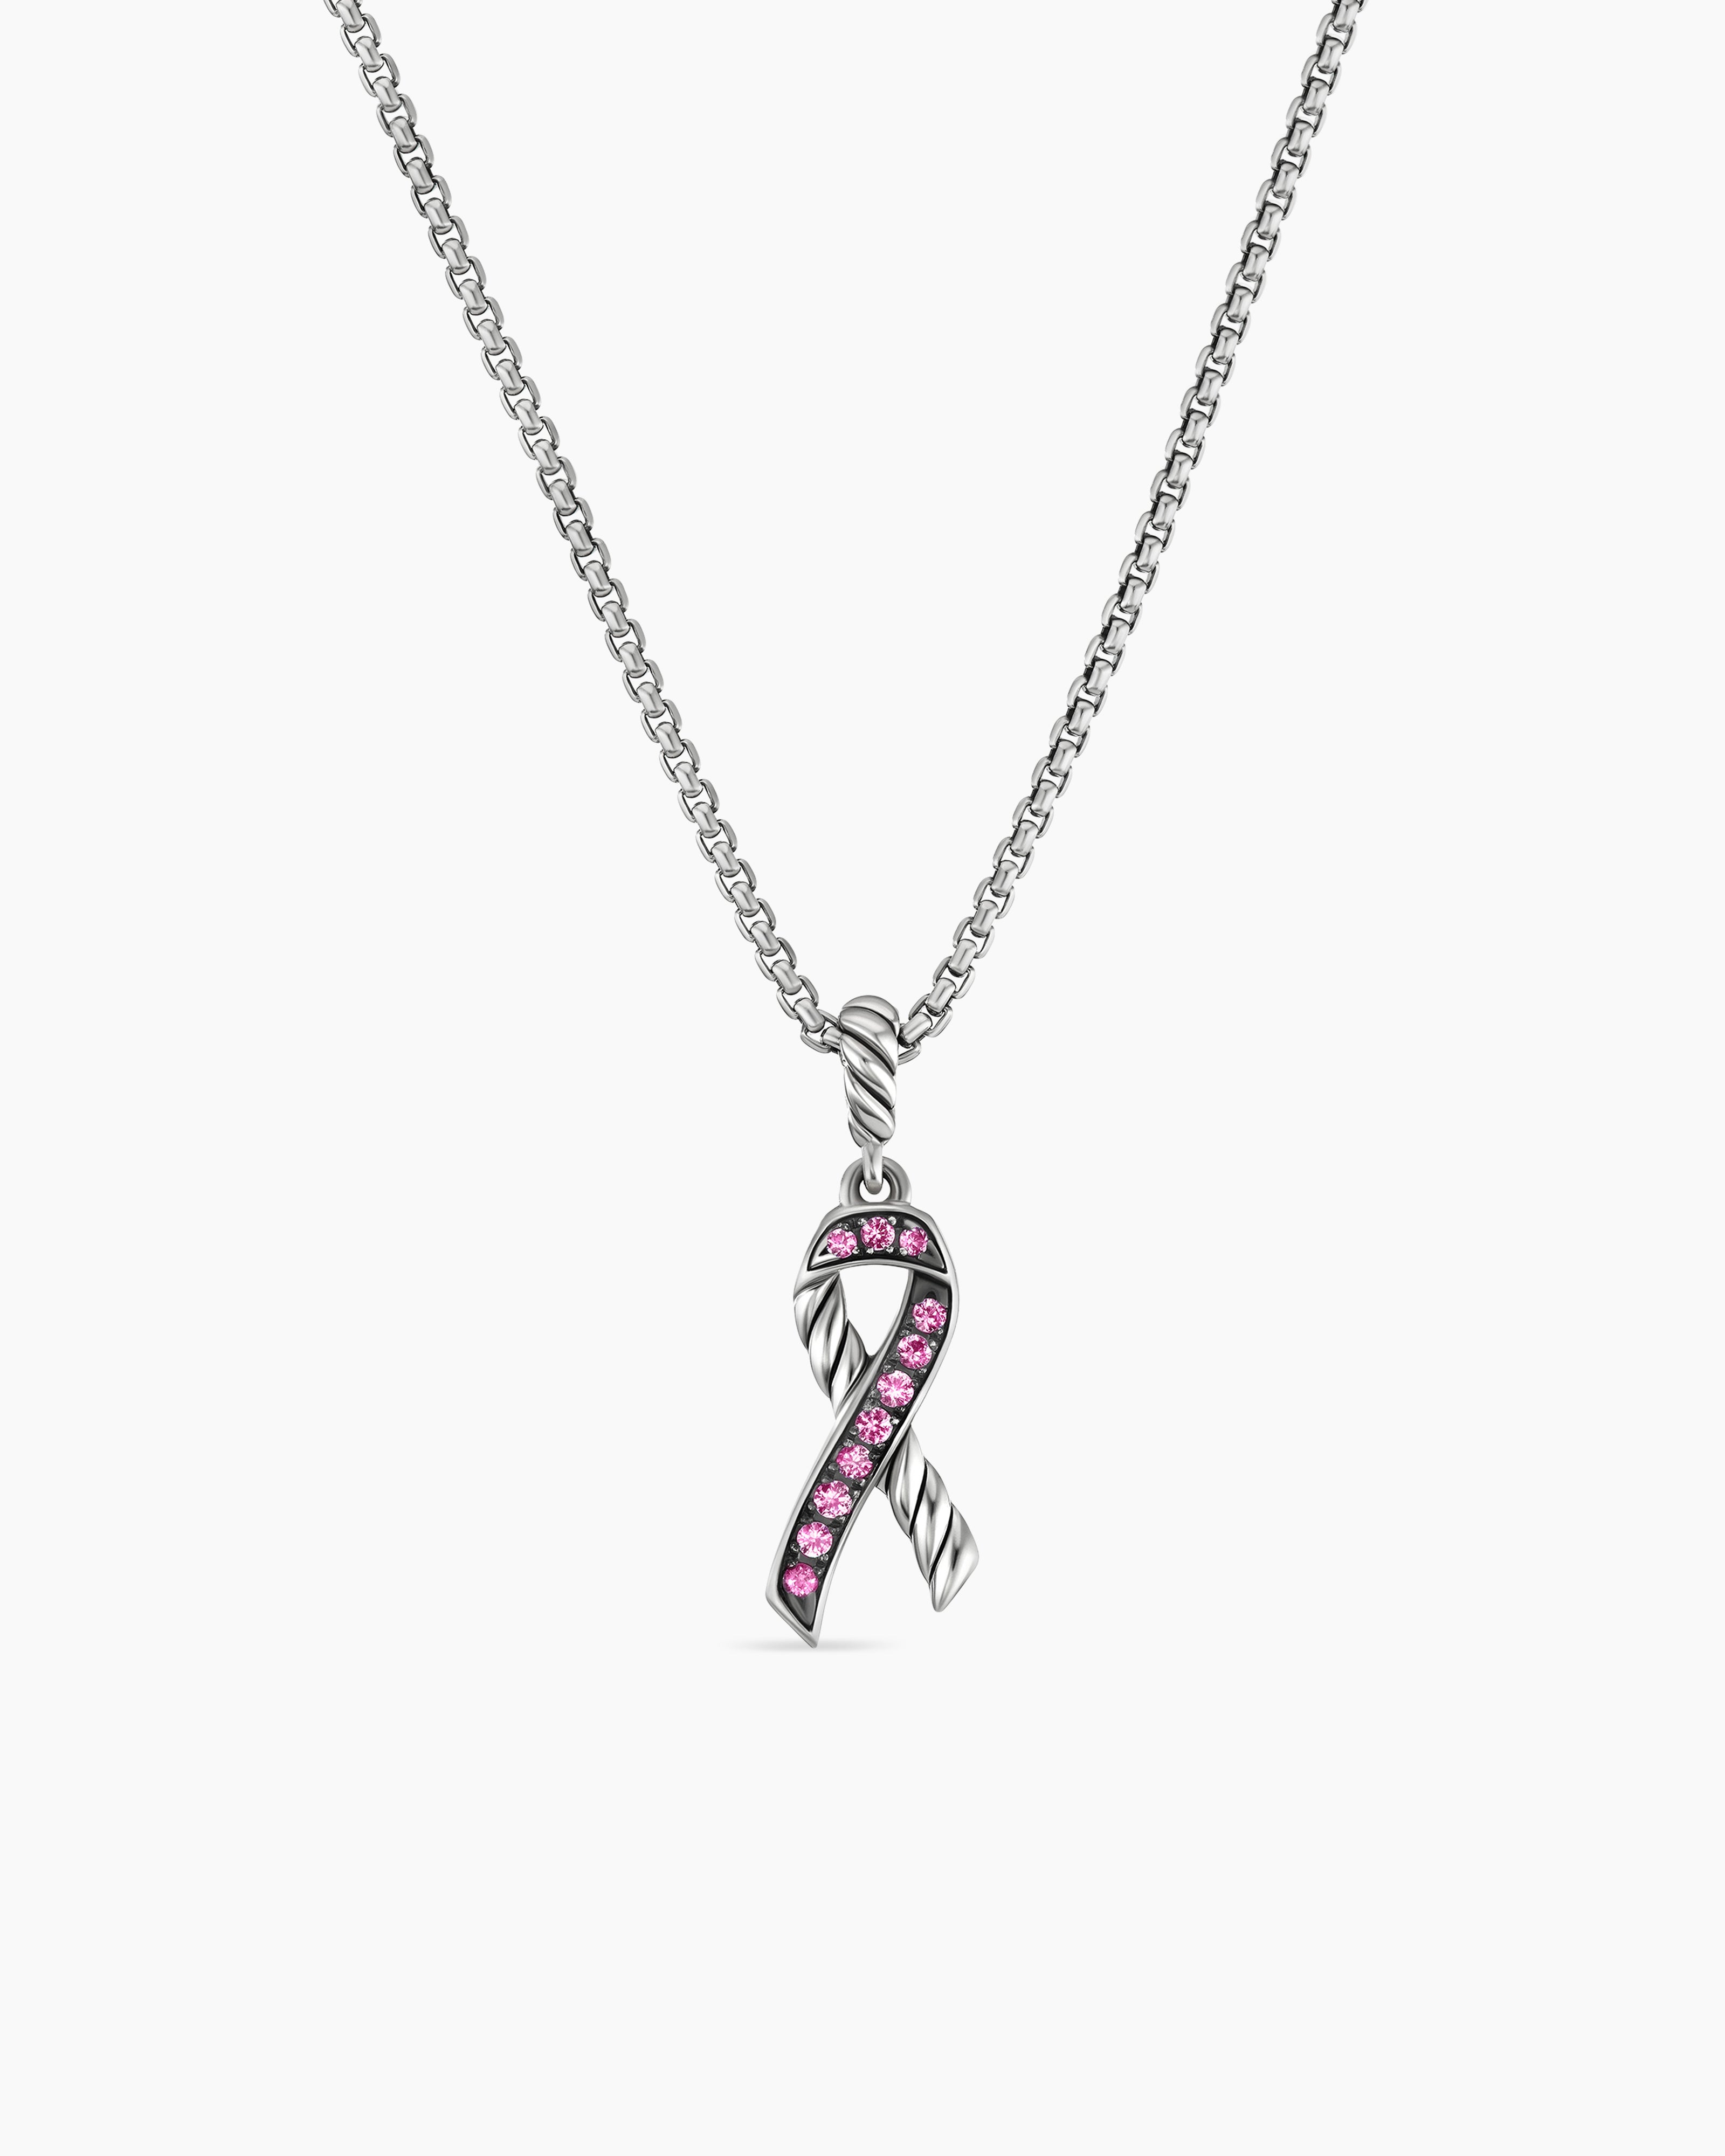 David Yurman Cable Collectibles Hot Pink Enamel Charm Necklace in 18K Yellow Gold with Center Diamond Women's Size 18 in